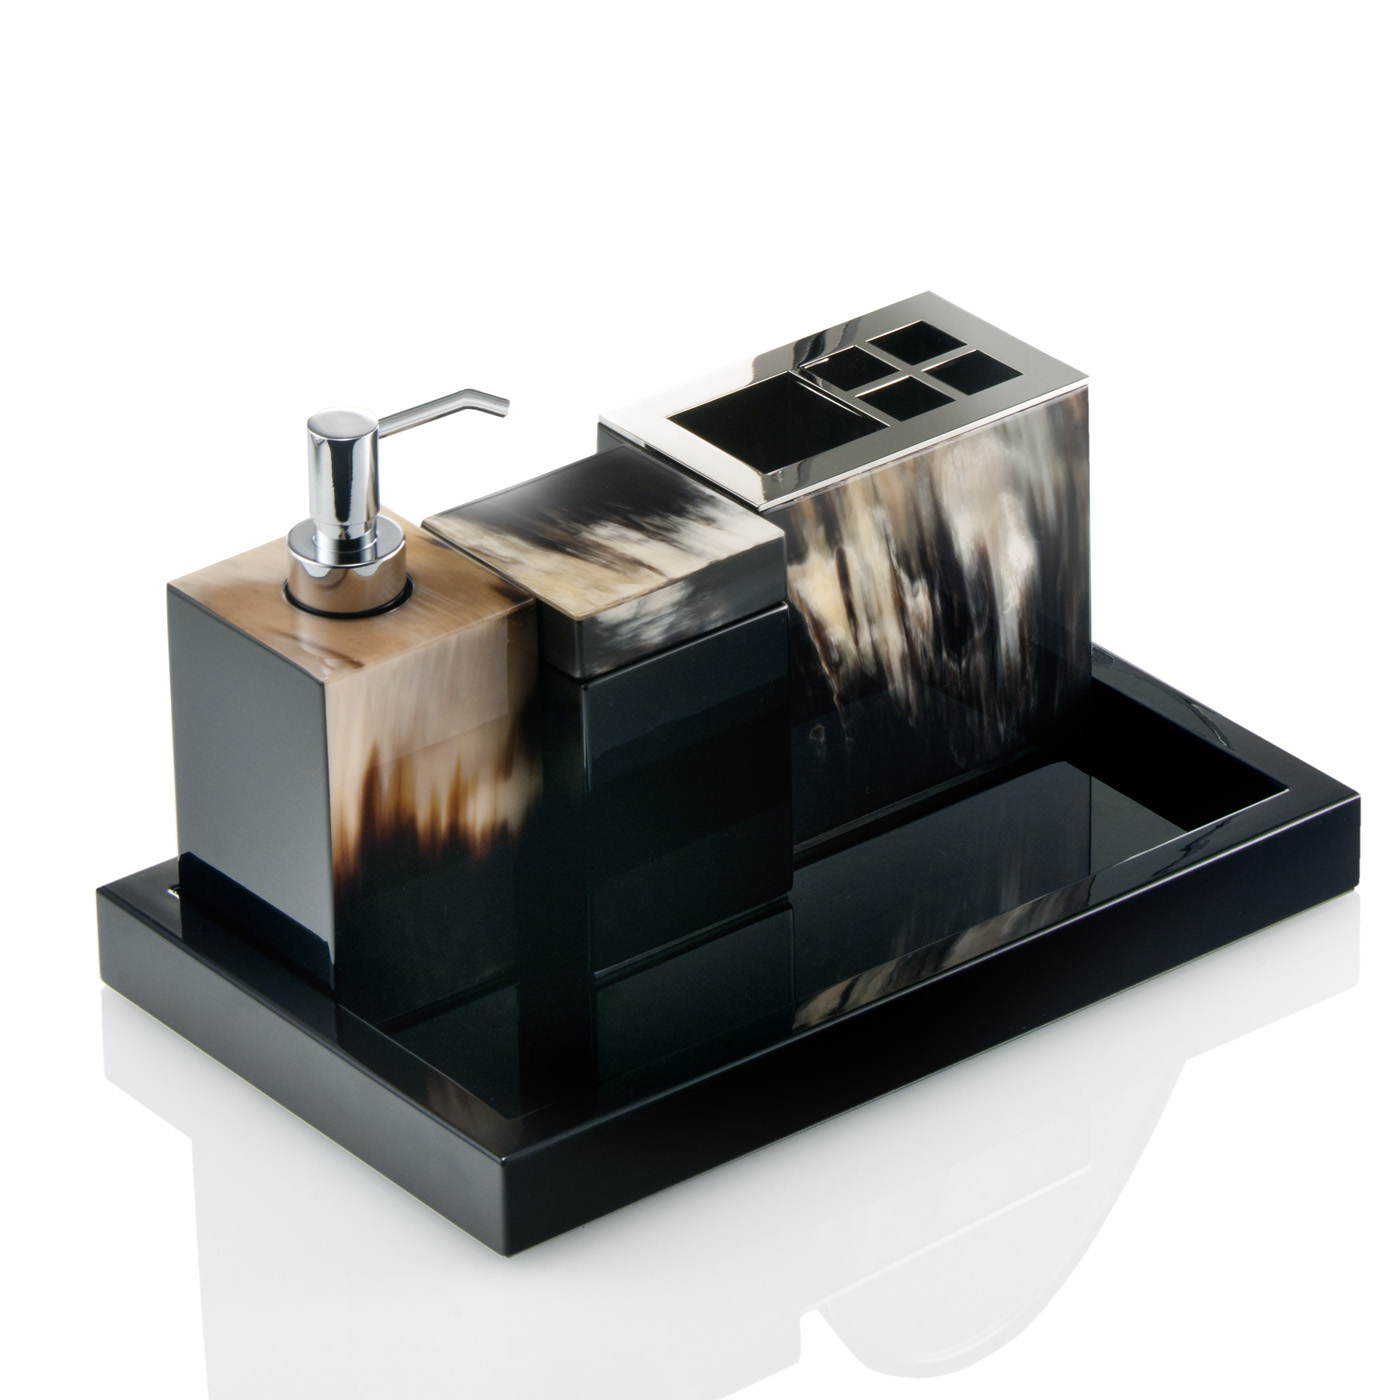 Bath sets - Iris bath set in horn and glossy black lacquered wood - detail - Arcahorn